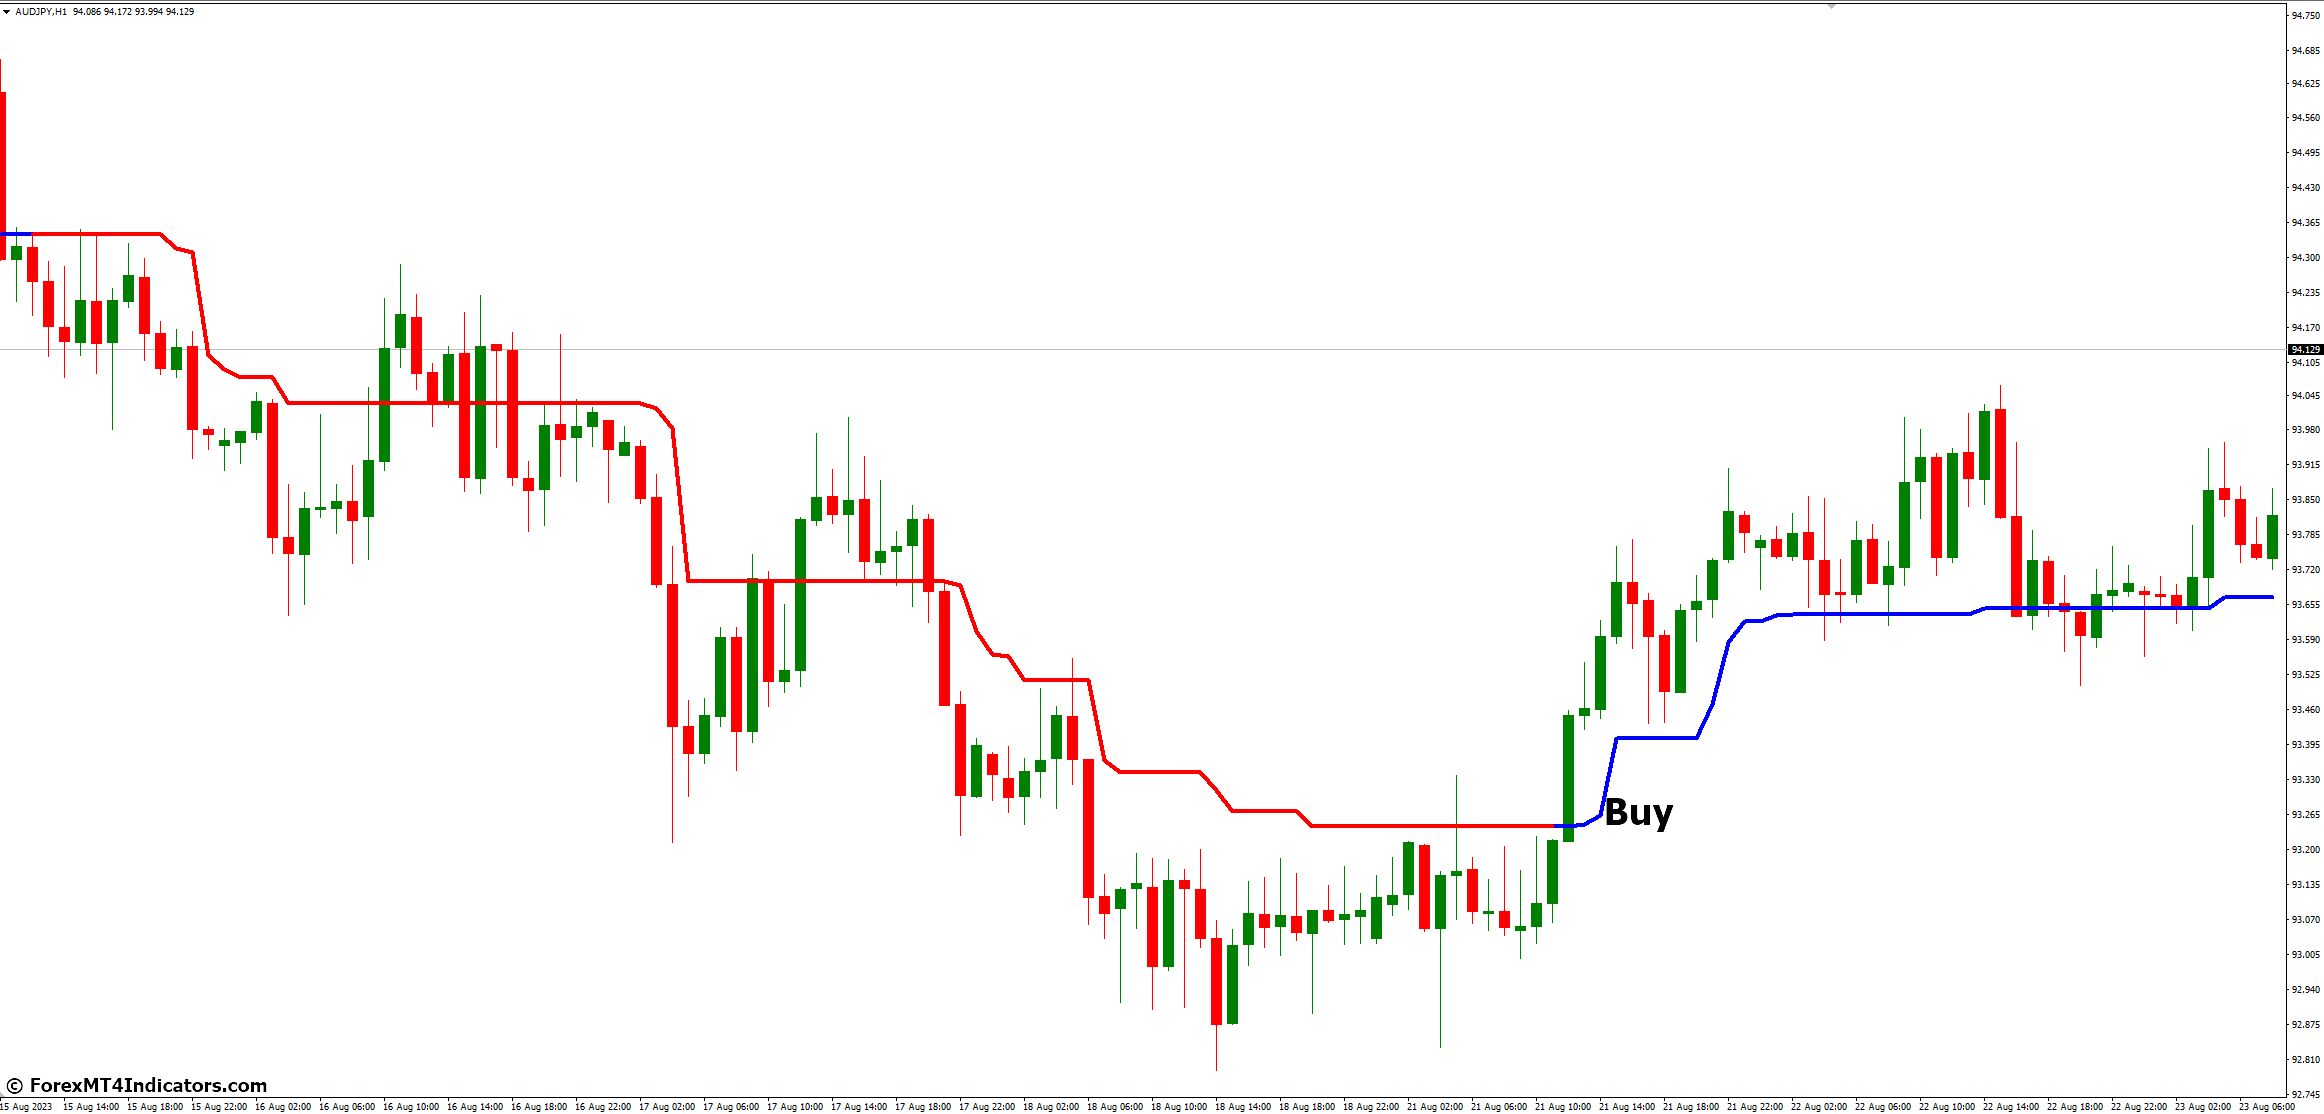 How to Trade with Trend Magic MT4 Indicator - Buy Entry